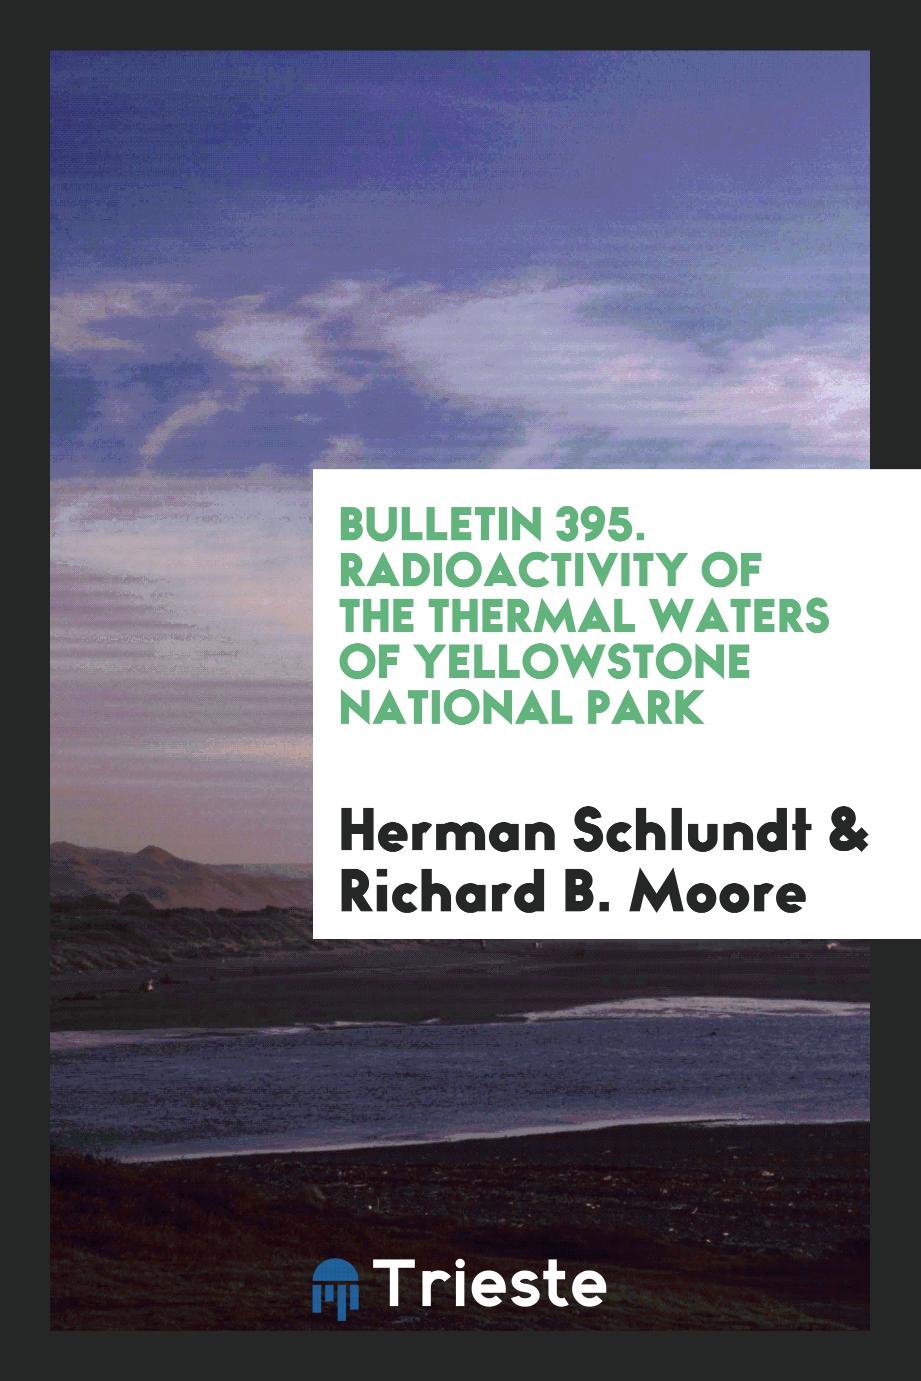 Bulletin 395. Radioactivity of the thermal waters of Yellowstone National Park